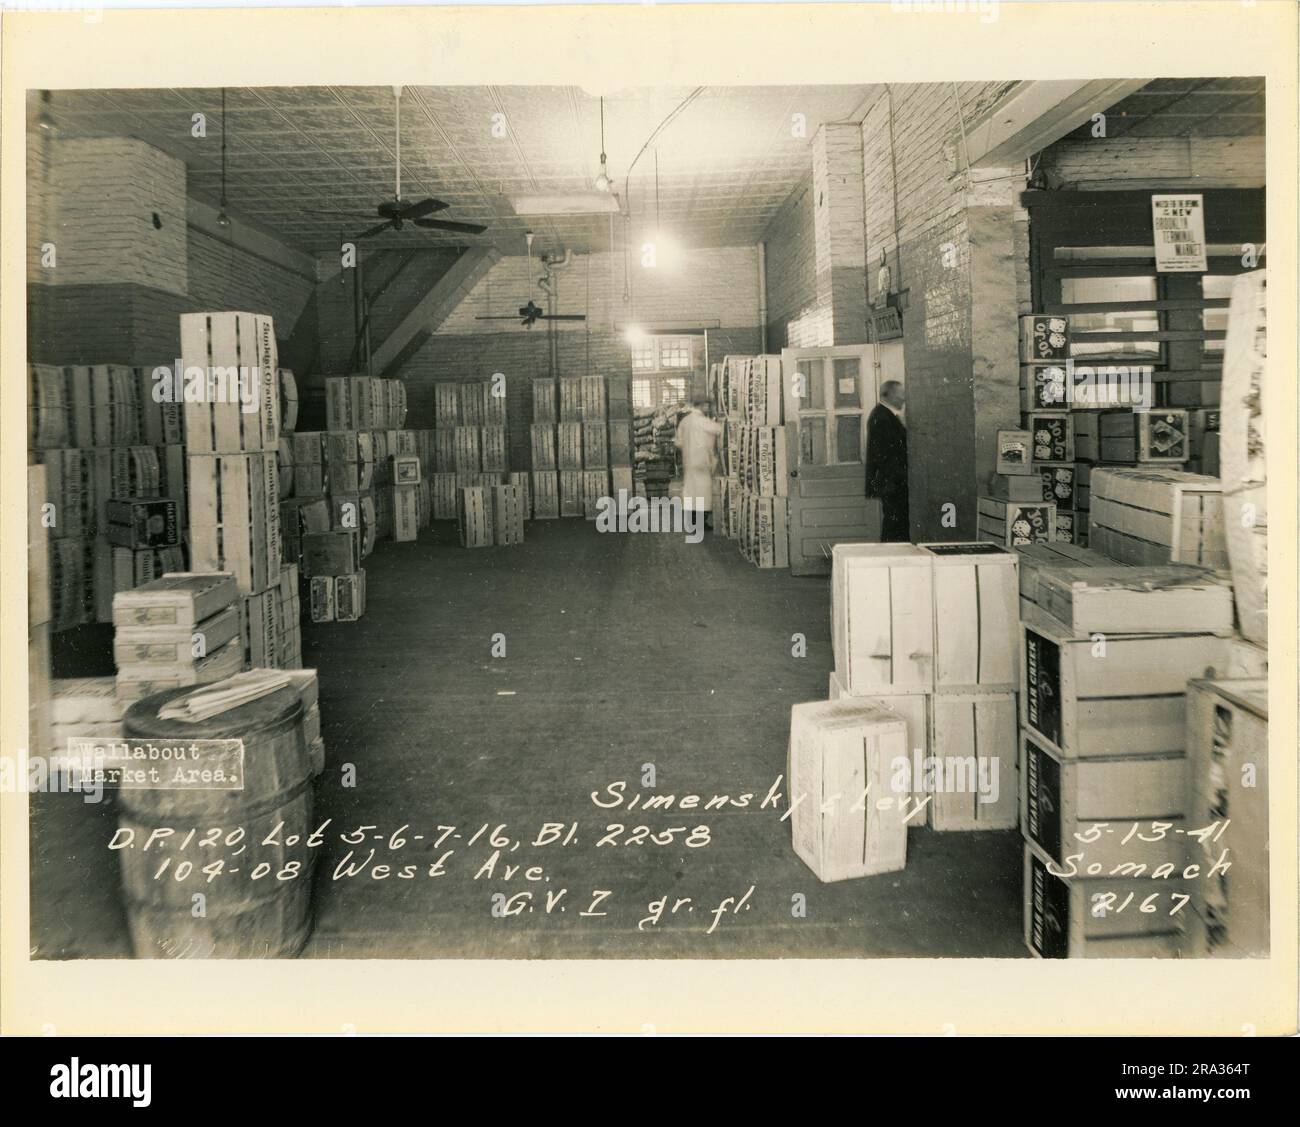 Photograph of interior of lots 5-6-7-16, Bl. 2258, 104-08 West Ave, ground floor of Simensky & Levy, D.P. 120. Stock Photo